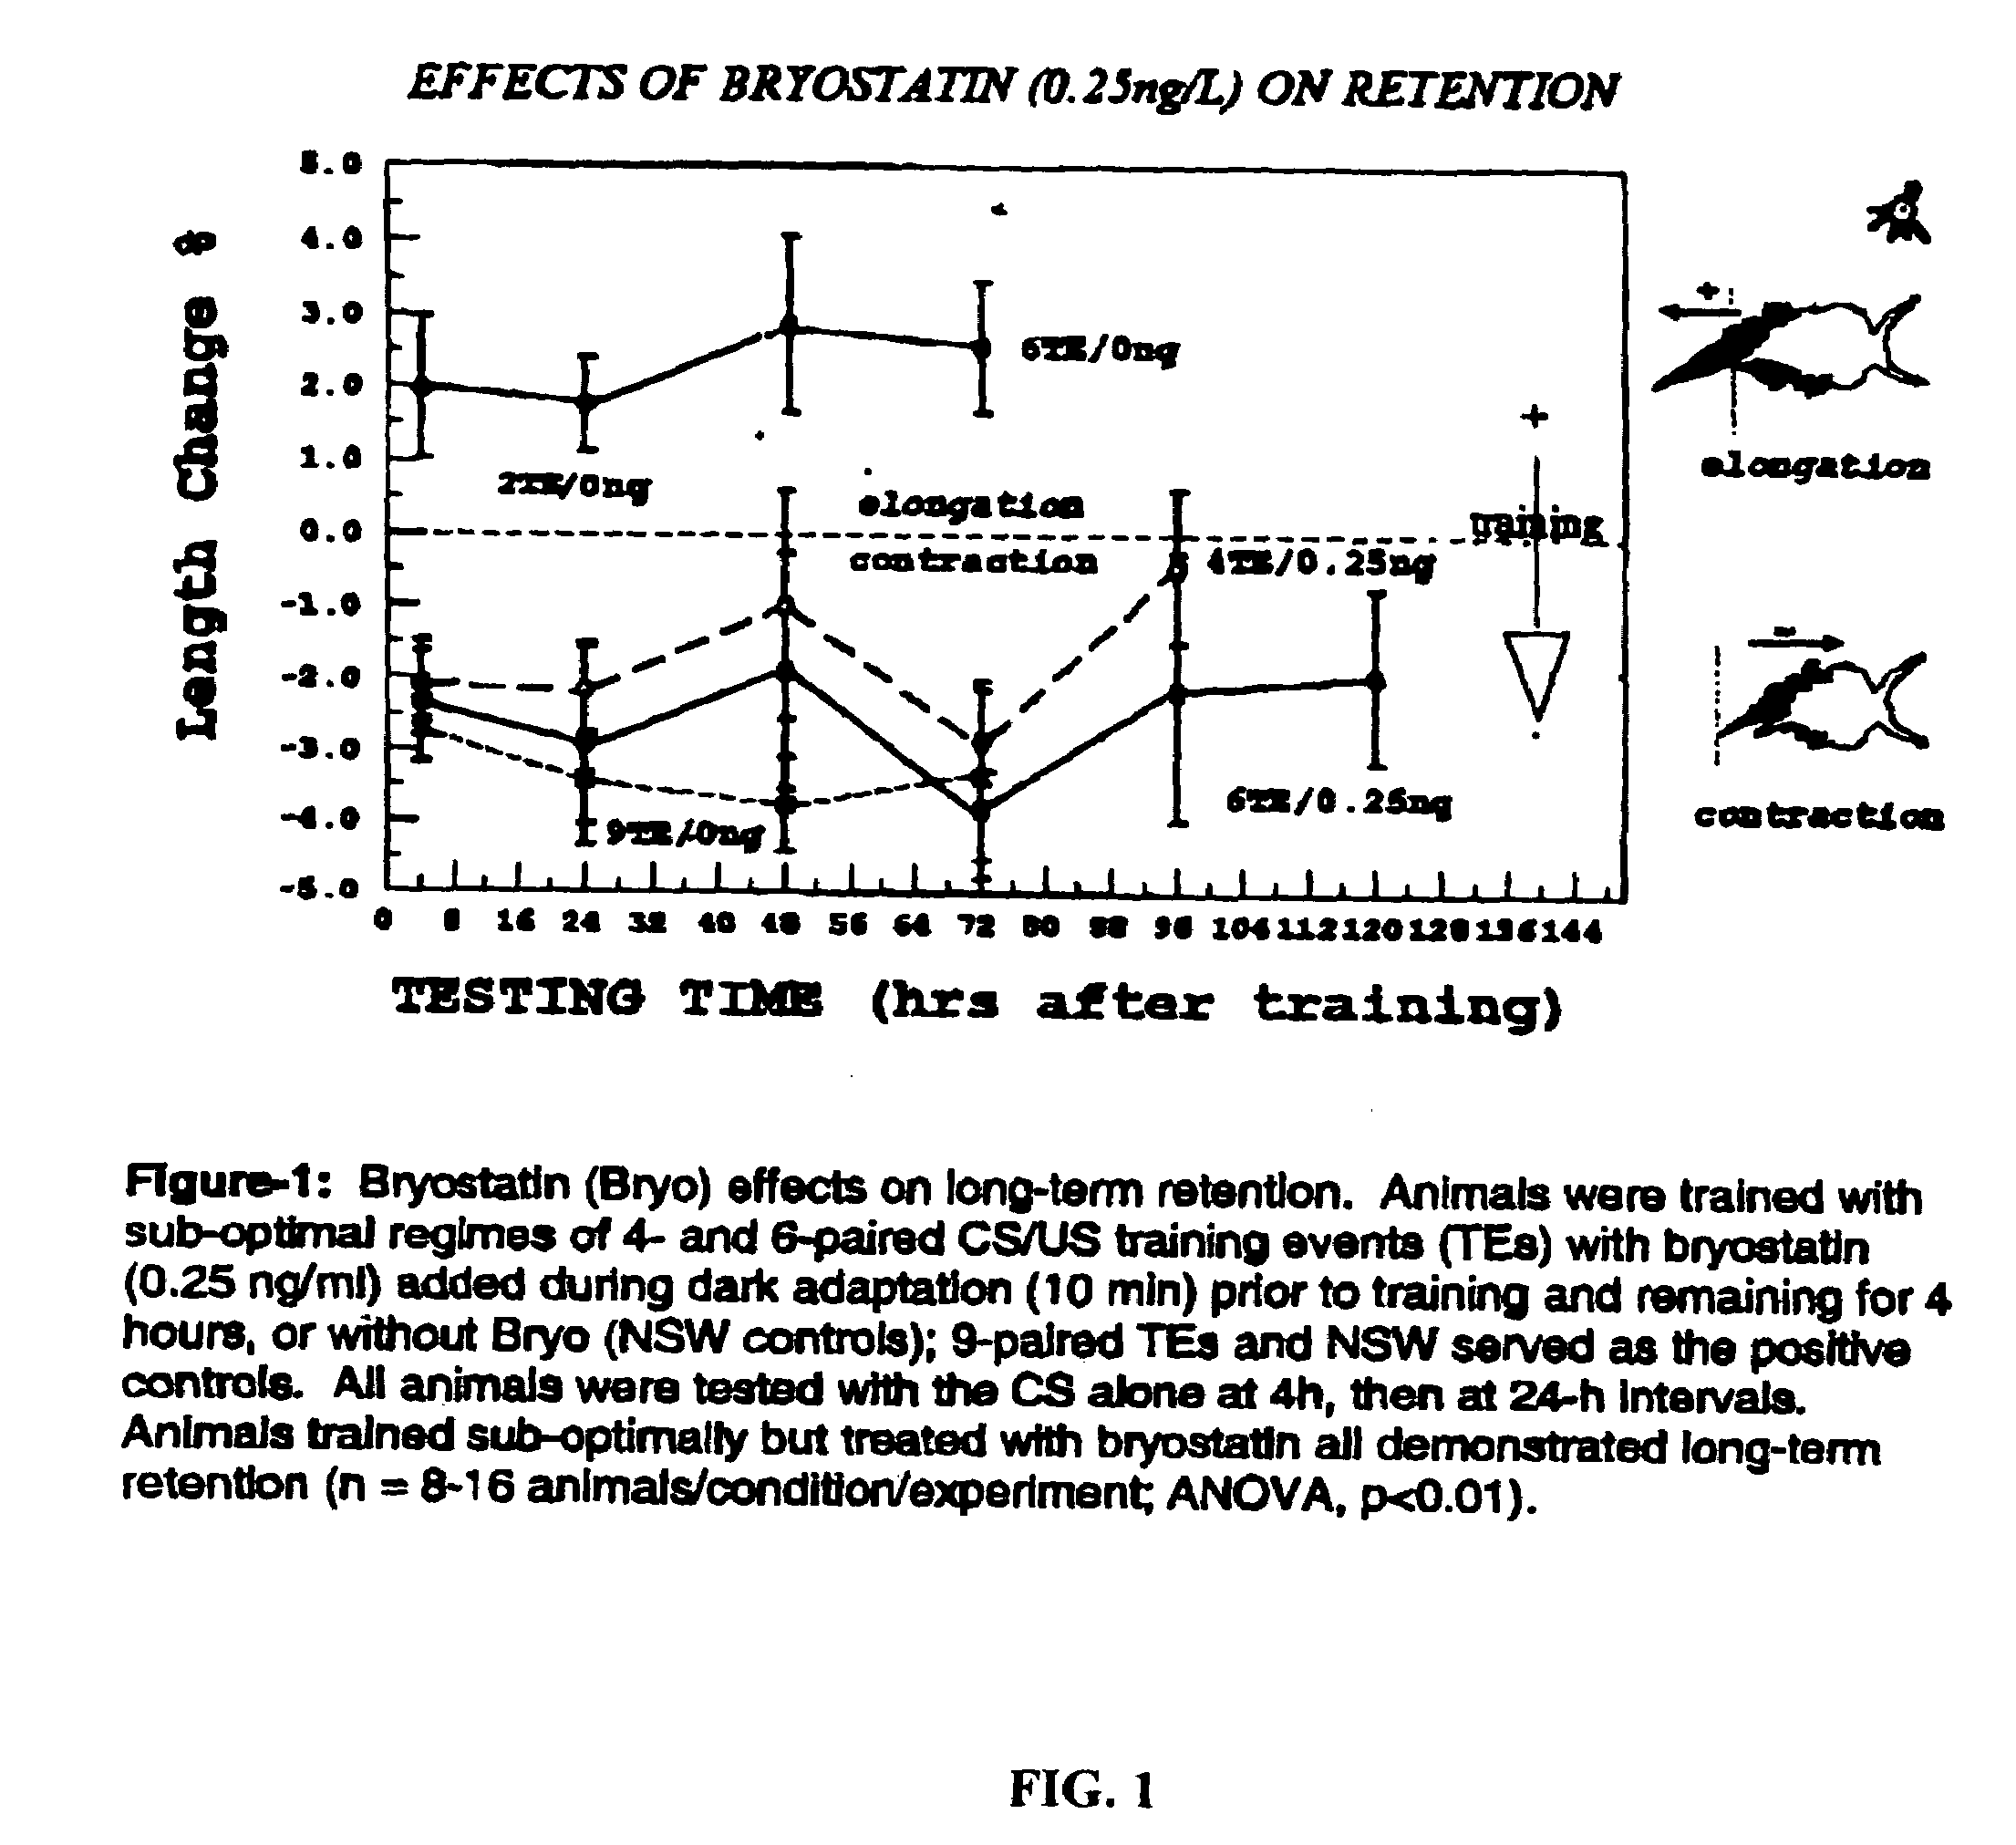 Methods of stimulating cellular growth, synaptic remodeling and consolidation of long-term memory